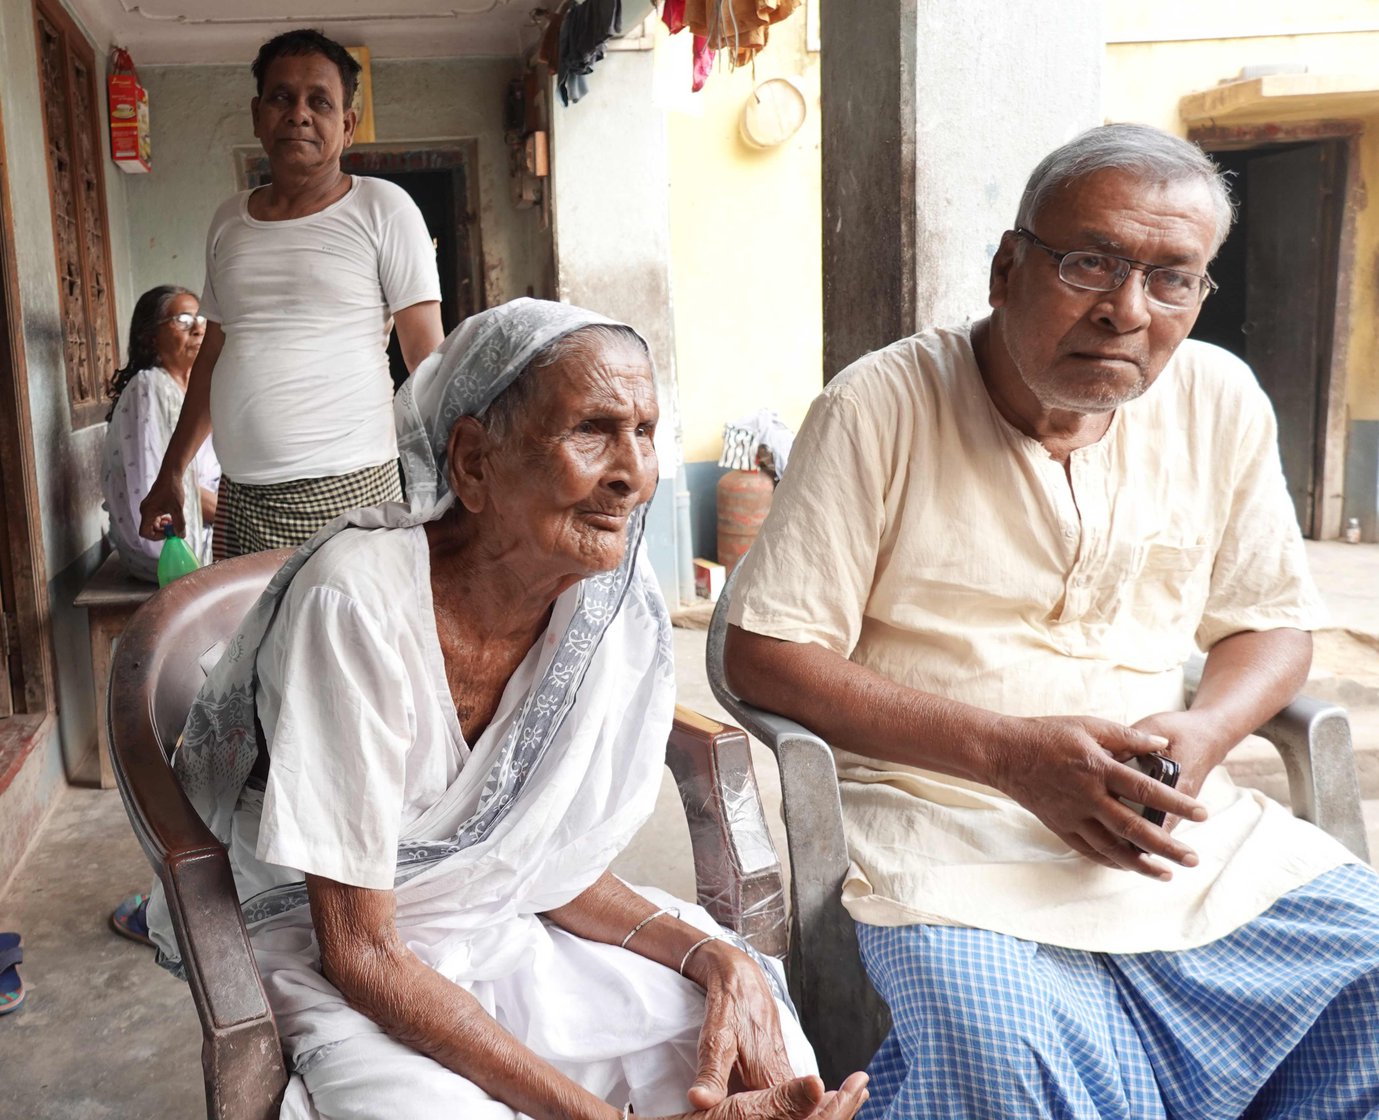 Bhabani’s age is somewhere between 101 and 104. Here she is with her son Shyam Sundar Mahato who is in his 70s